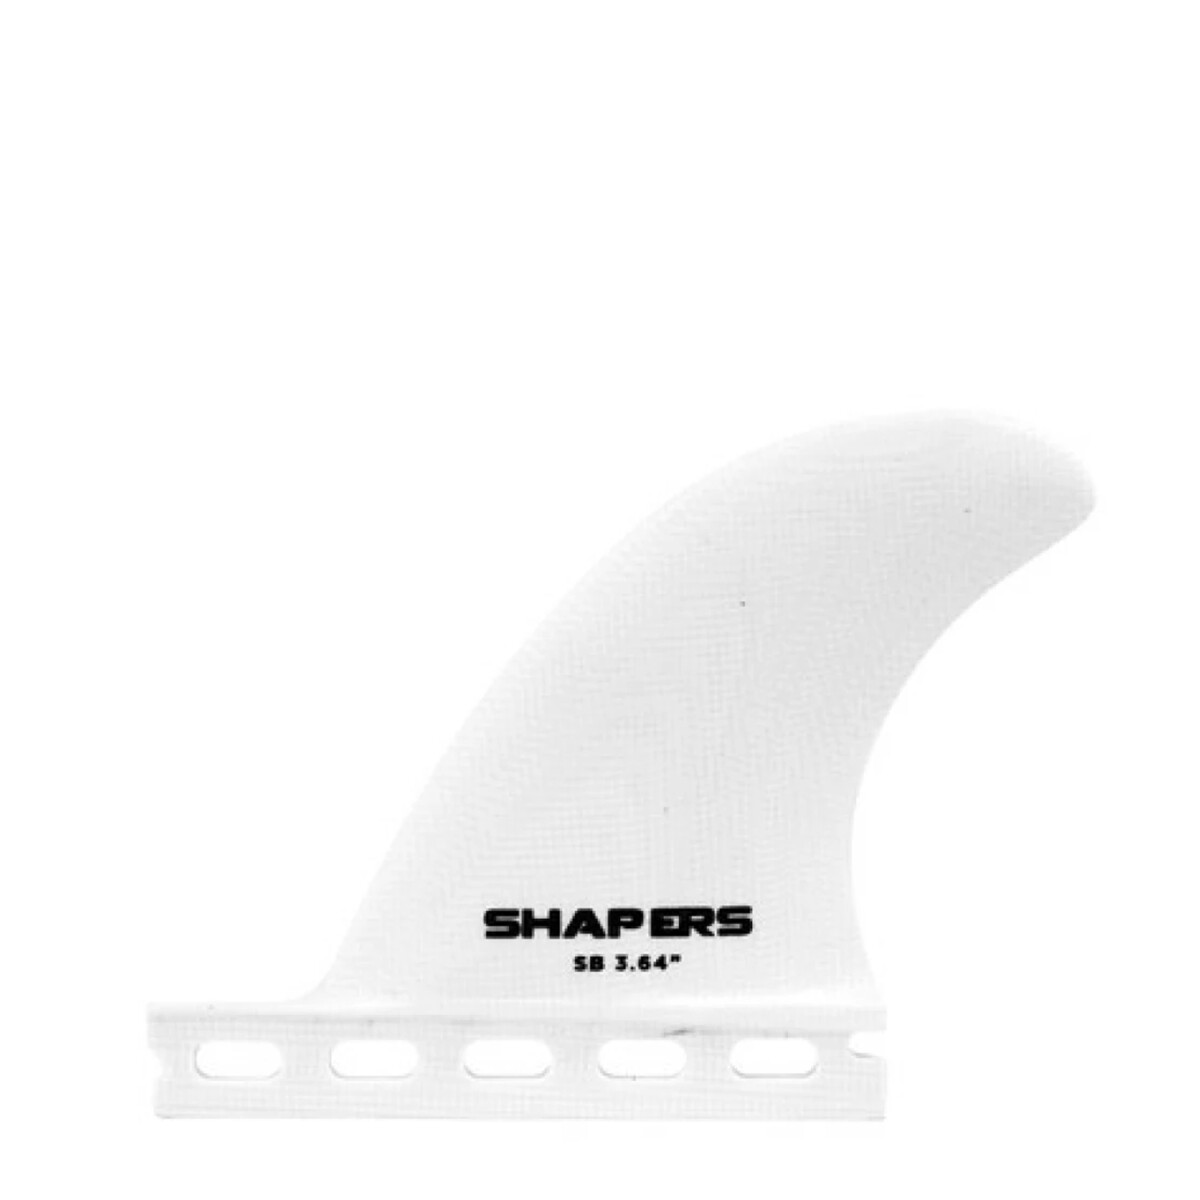 Quilla Shapers Side Bites - 3.64” White Single Tab 